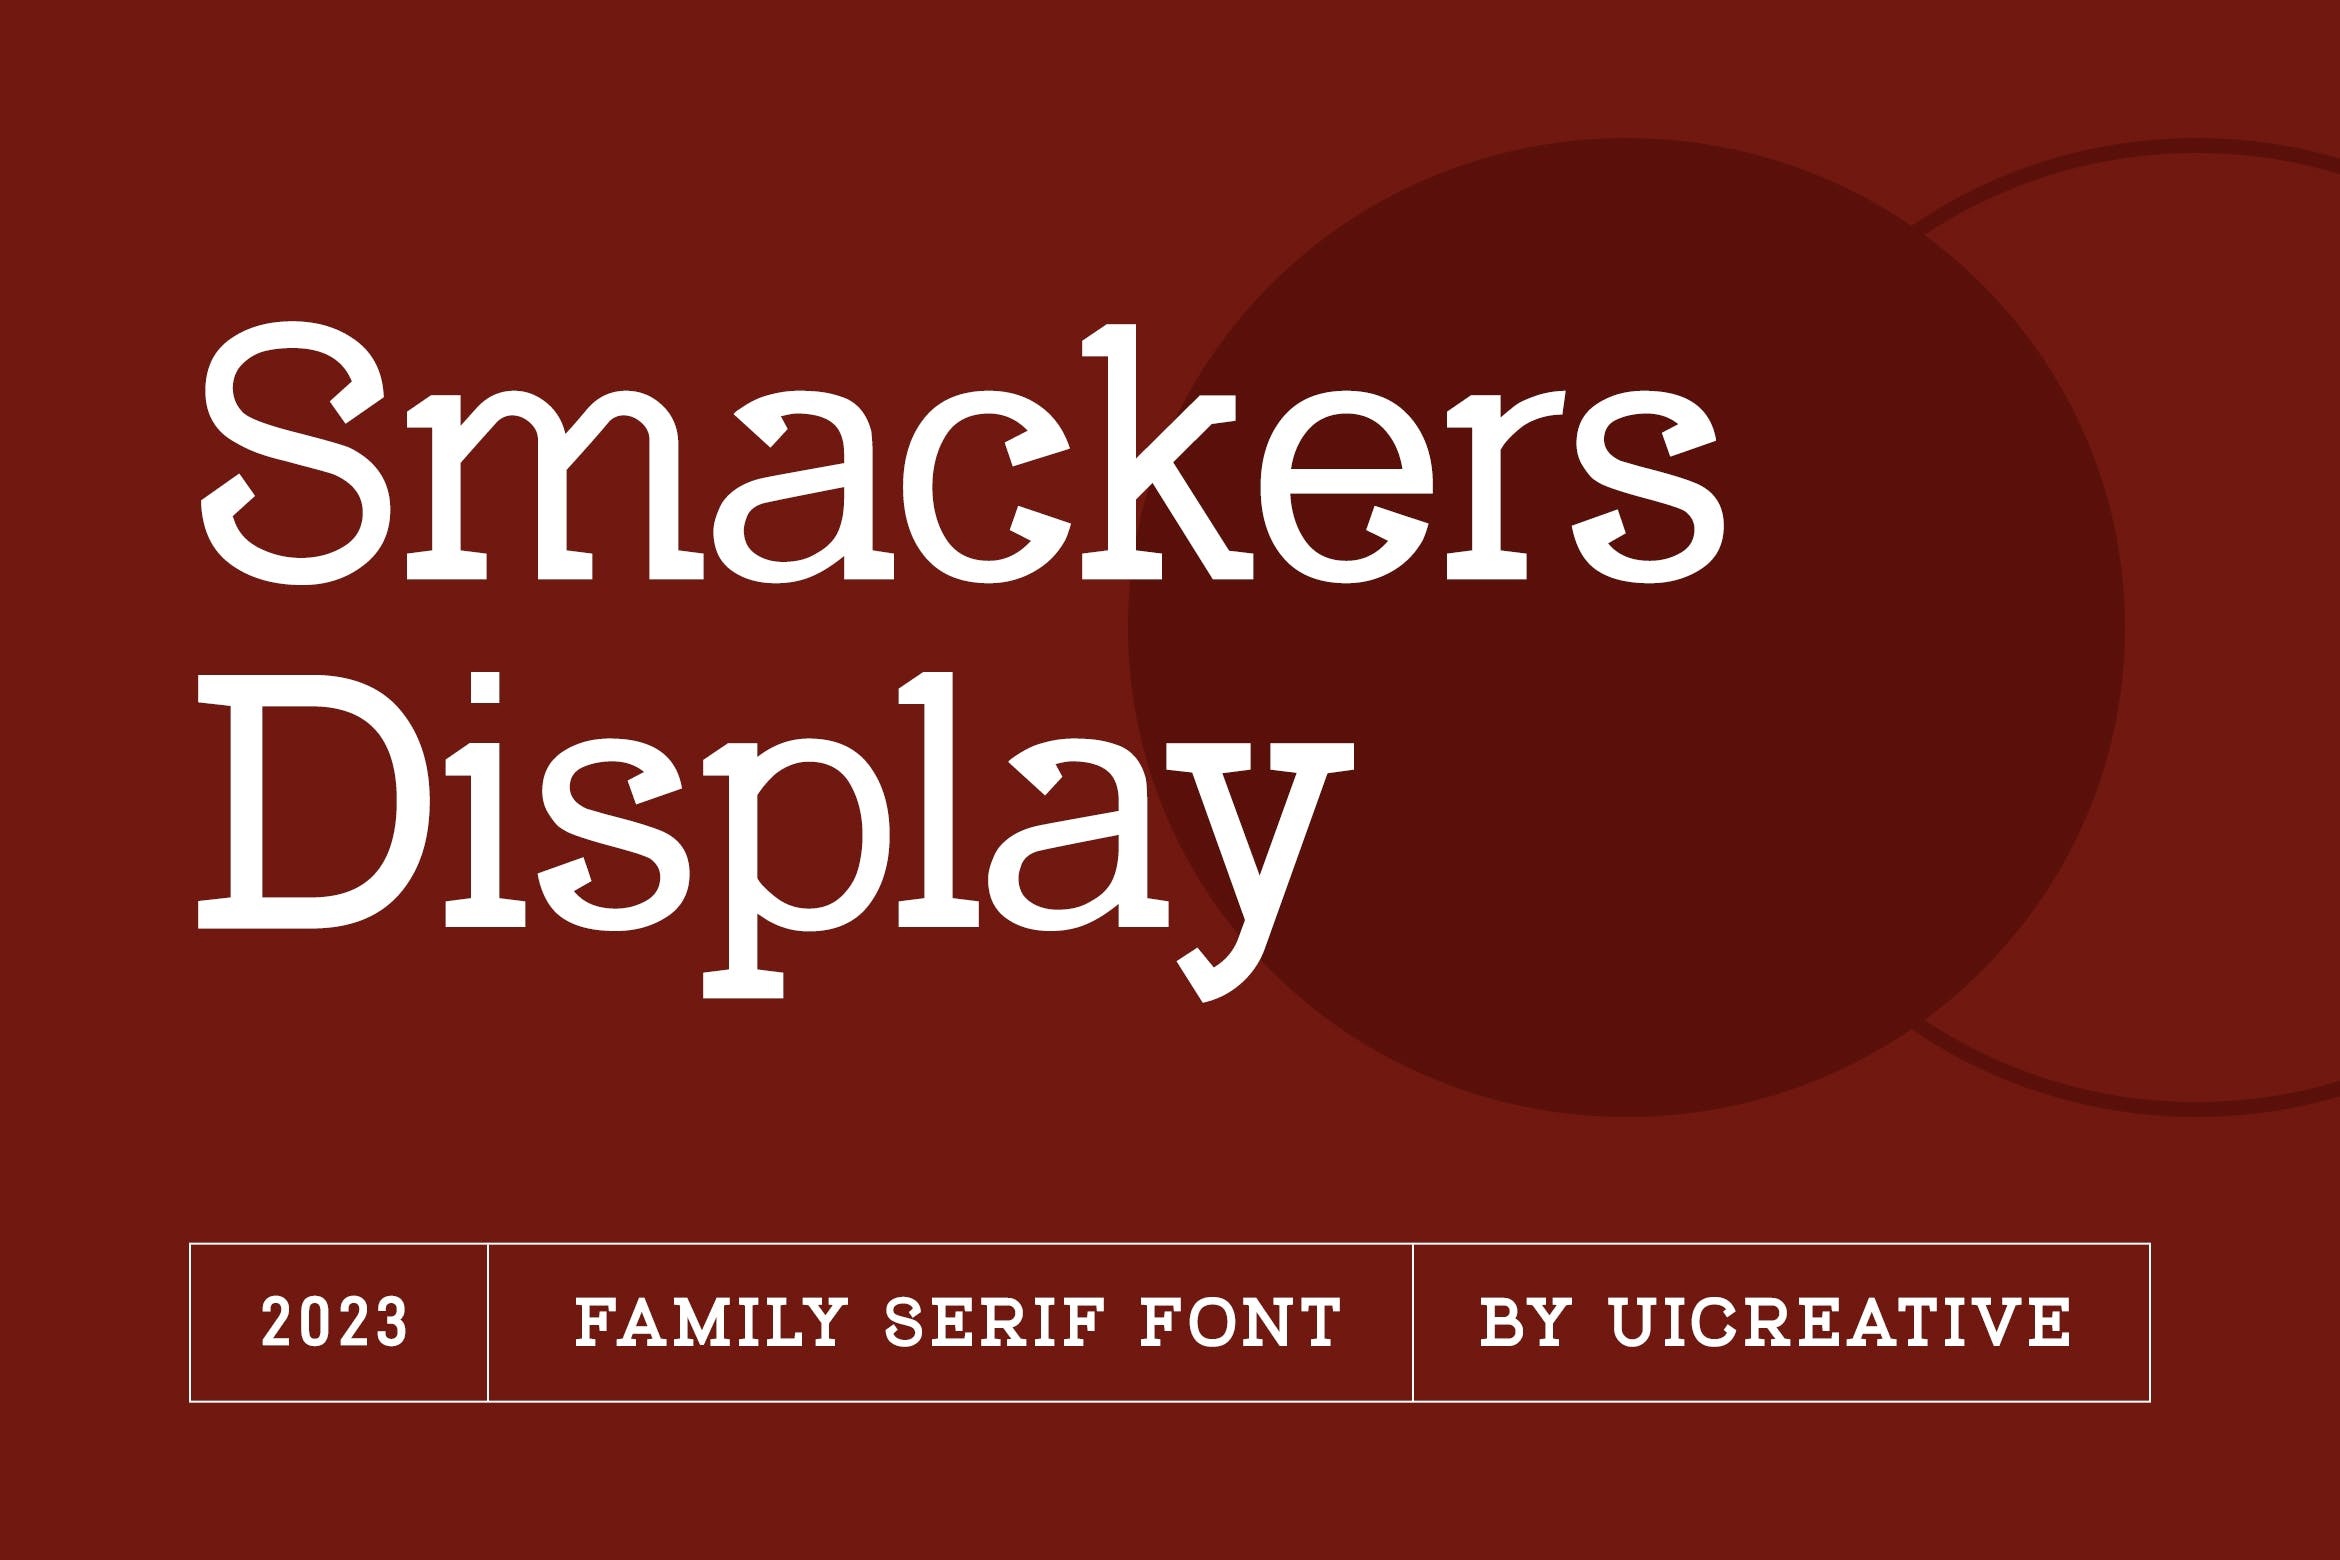 Font Smackers Display